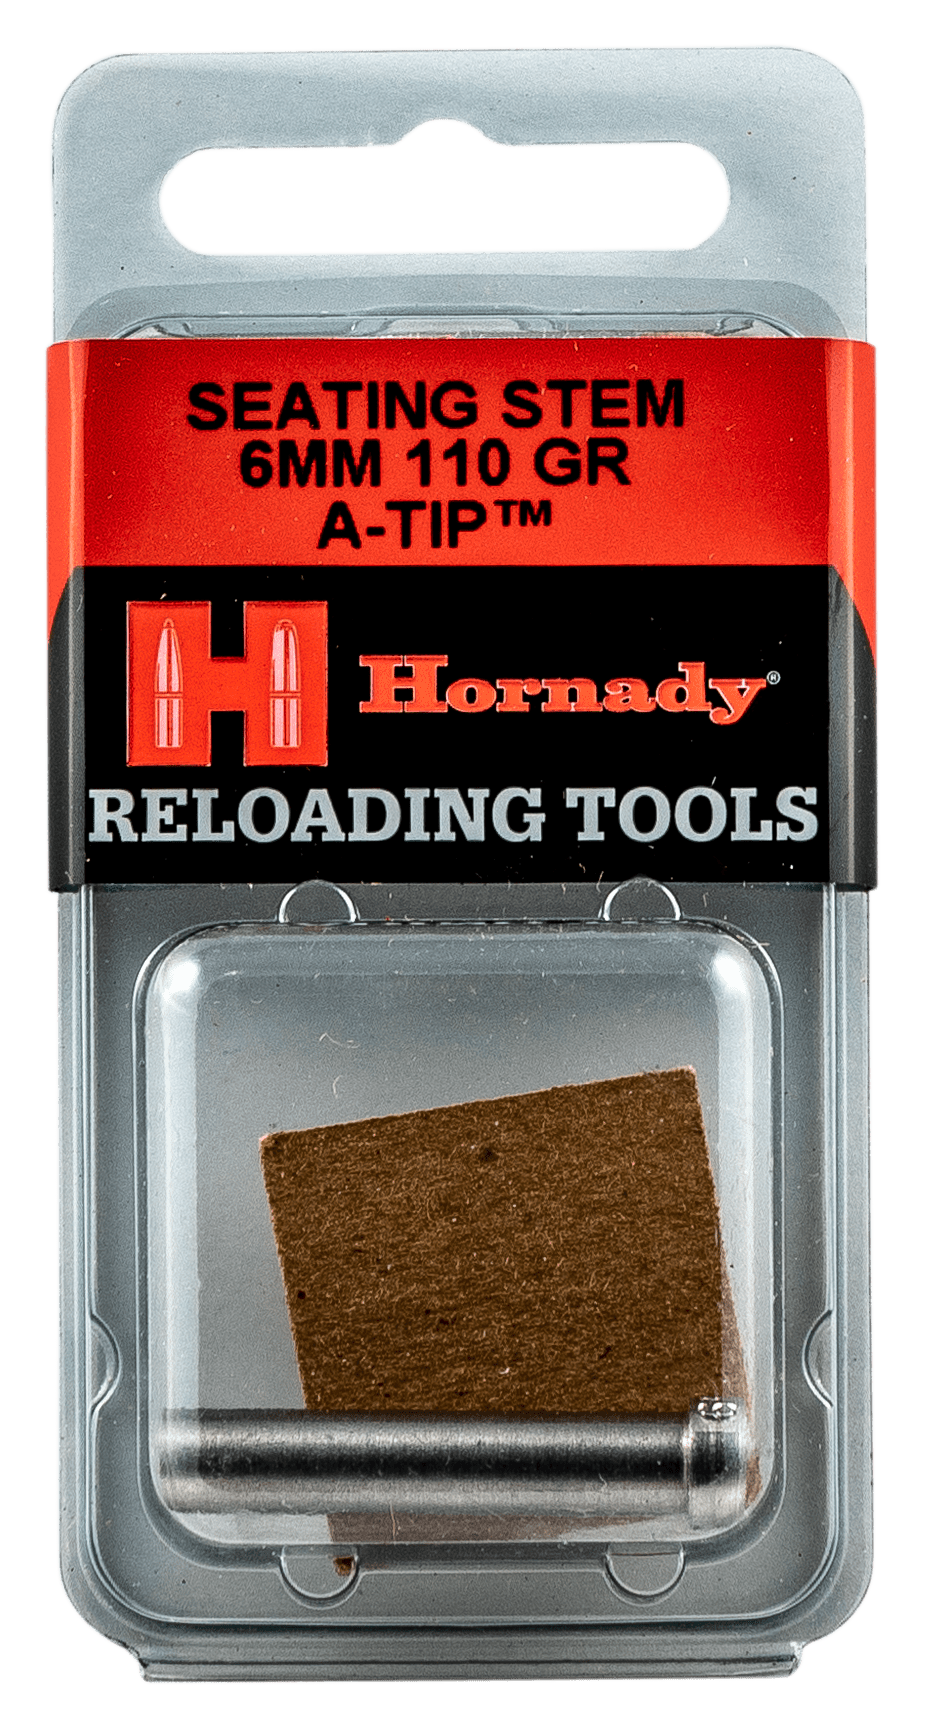 Hornady Hornady A-tip Seating Stem - 6mm .243 100gr. Reloading Tools